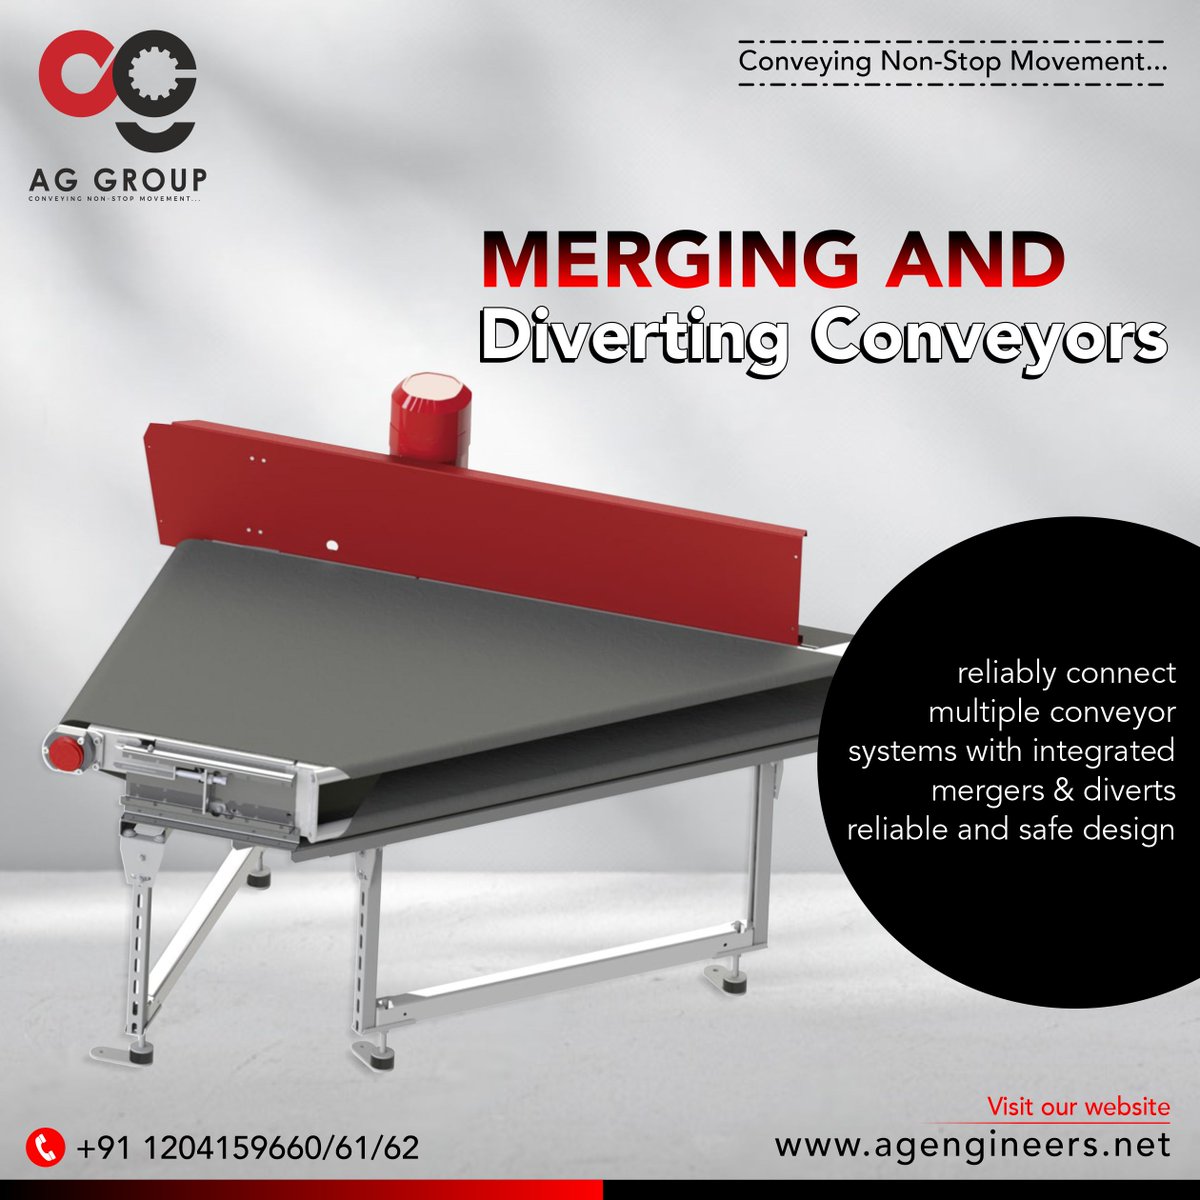 #AGGroup leads in #MergerConveyor manufacturing. Fed up with slow material transitions on your conveyorbelt? Our advanced MergerConveyor is here to transform your operations,mseamlessly merging multiple belt into one efficient flow with innovative features & top-notch performance